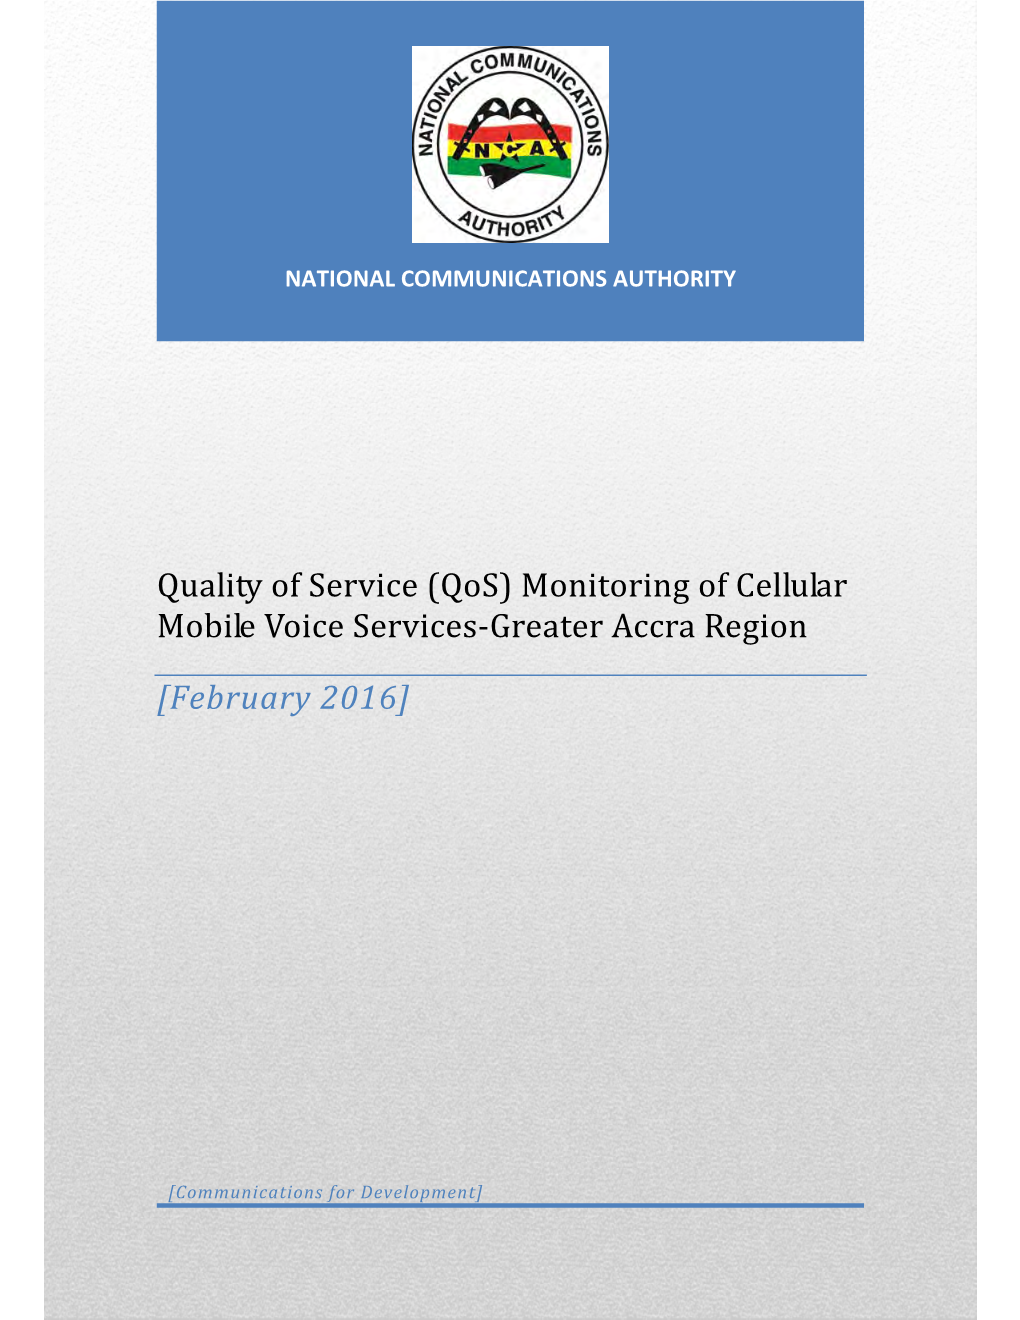 Qos Trends for February 2016 Greater Accra Region